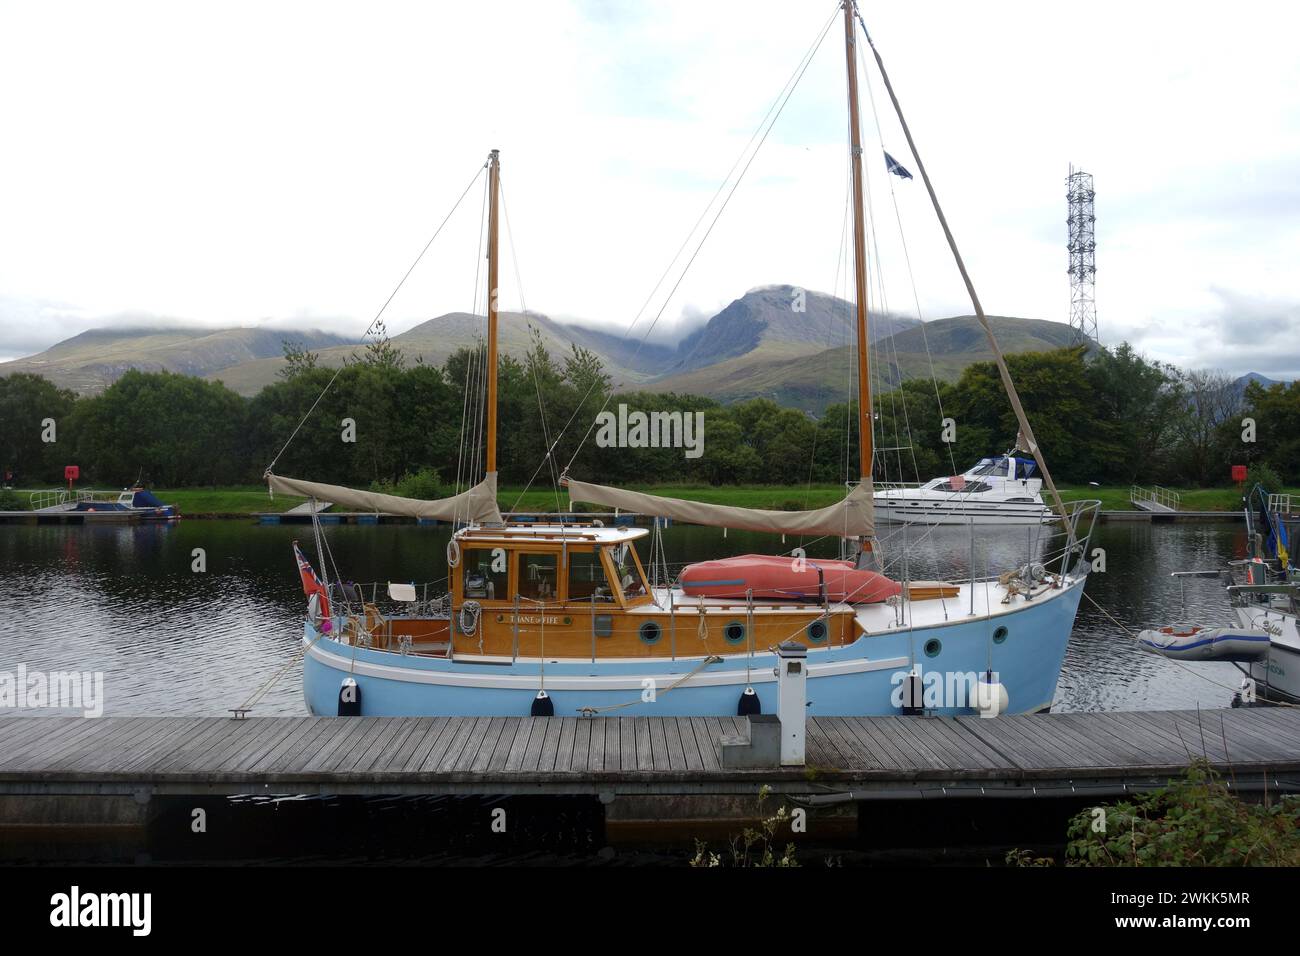 Pleasure Boat Moored on Tow Path on the Caledonian Canal with Ben Nevis by 'Neptunes Staircase' near Fort William in the Highlands of Scotland. Stock Photo